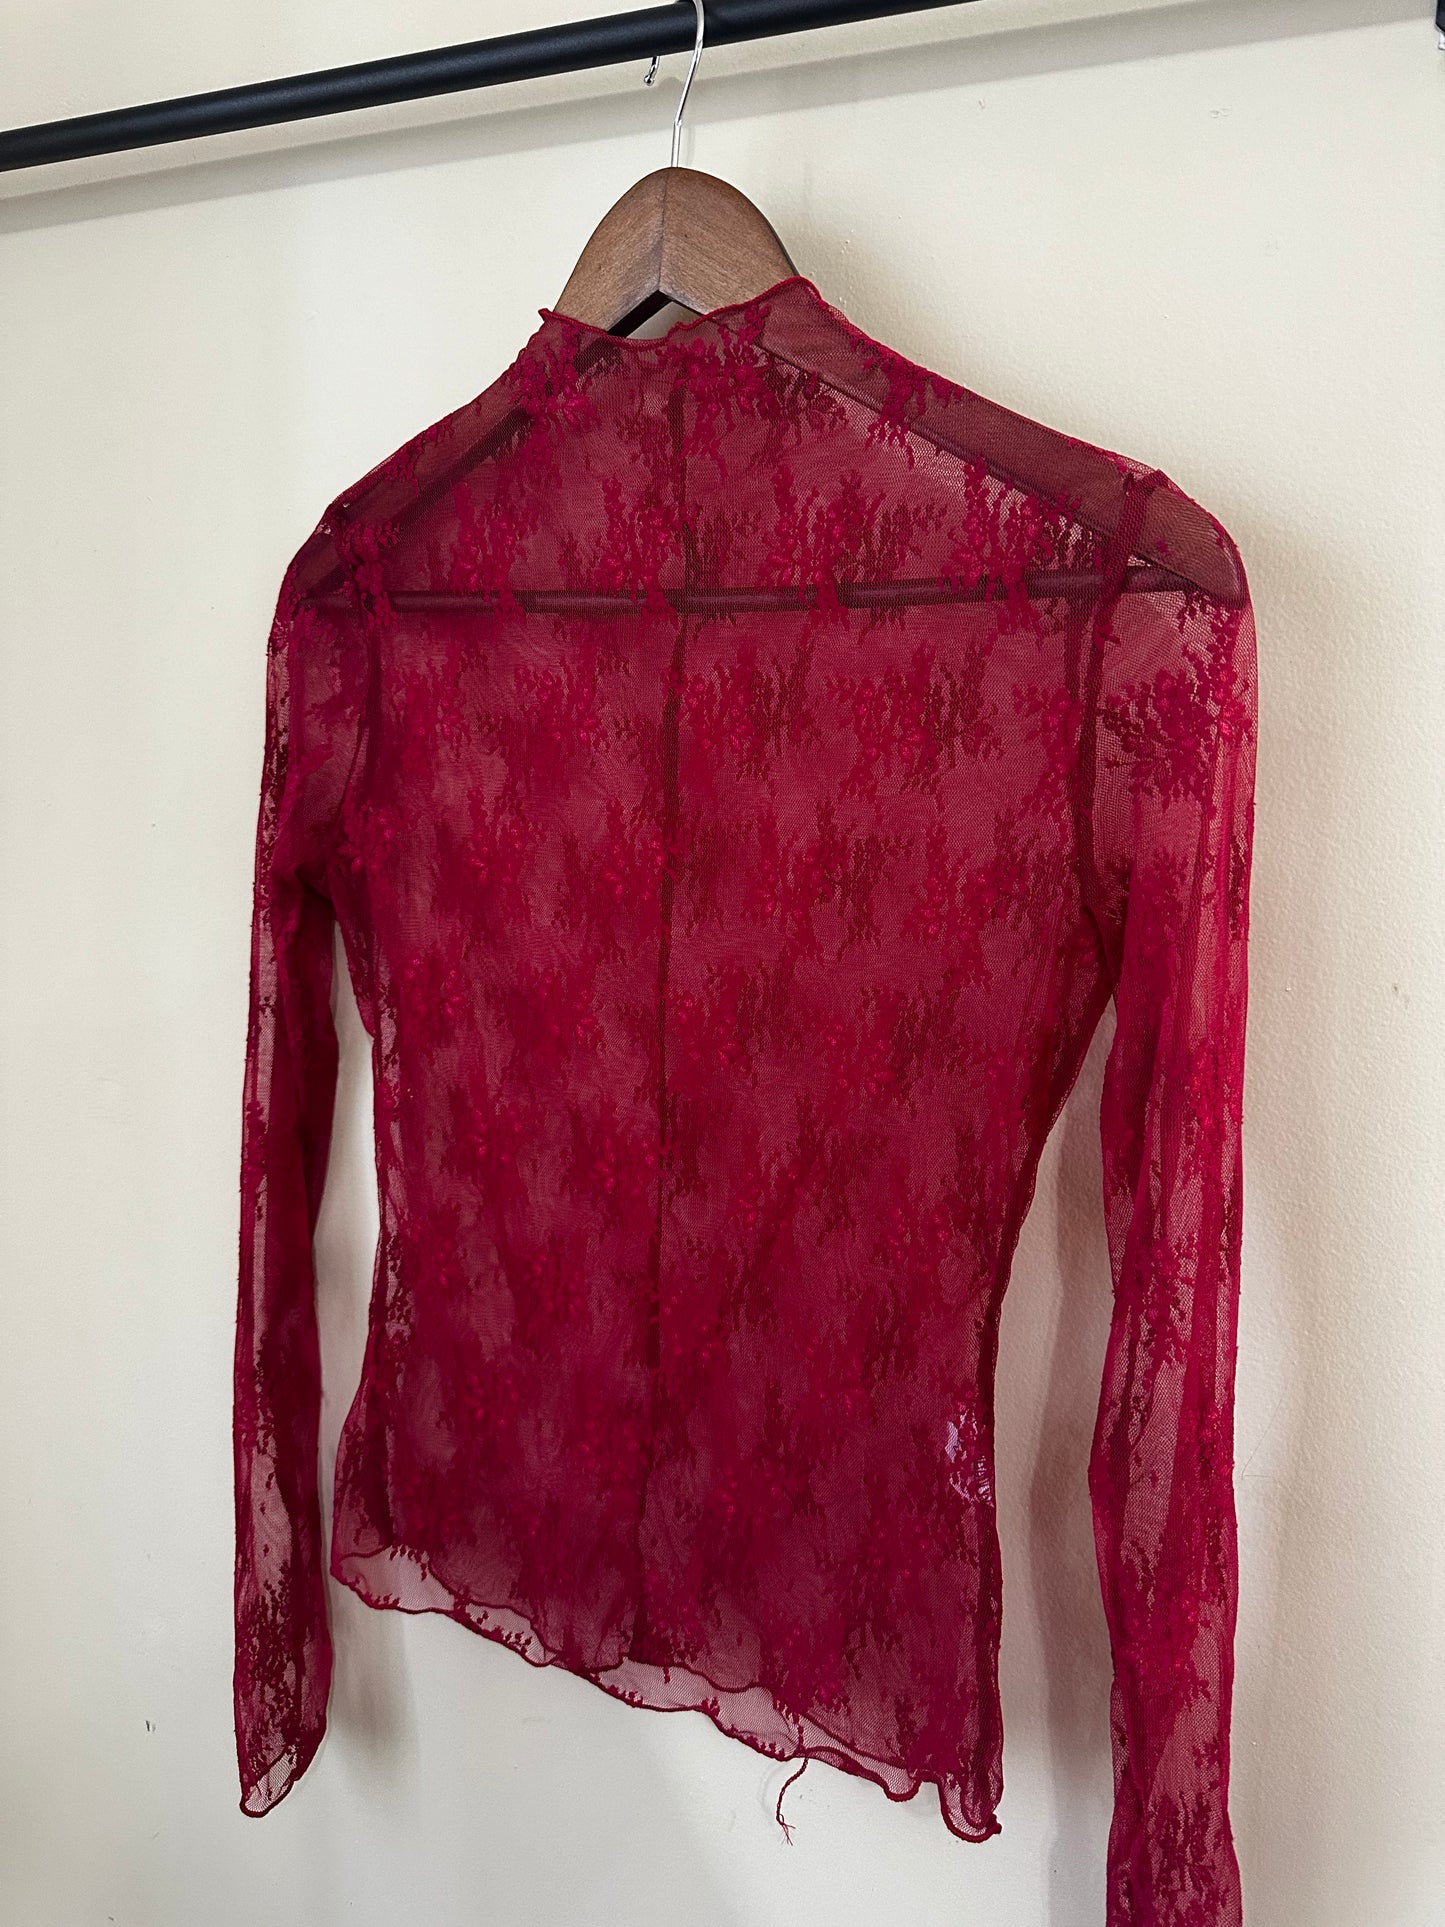 Lace Flowered Top - Dark Red